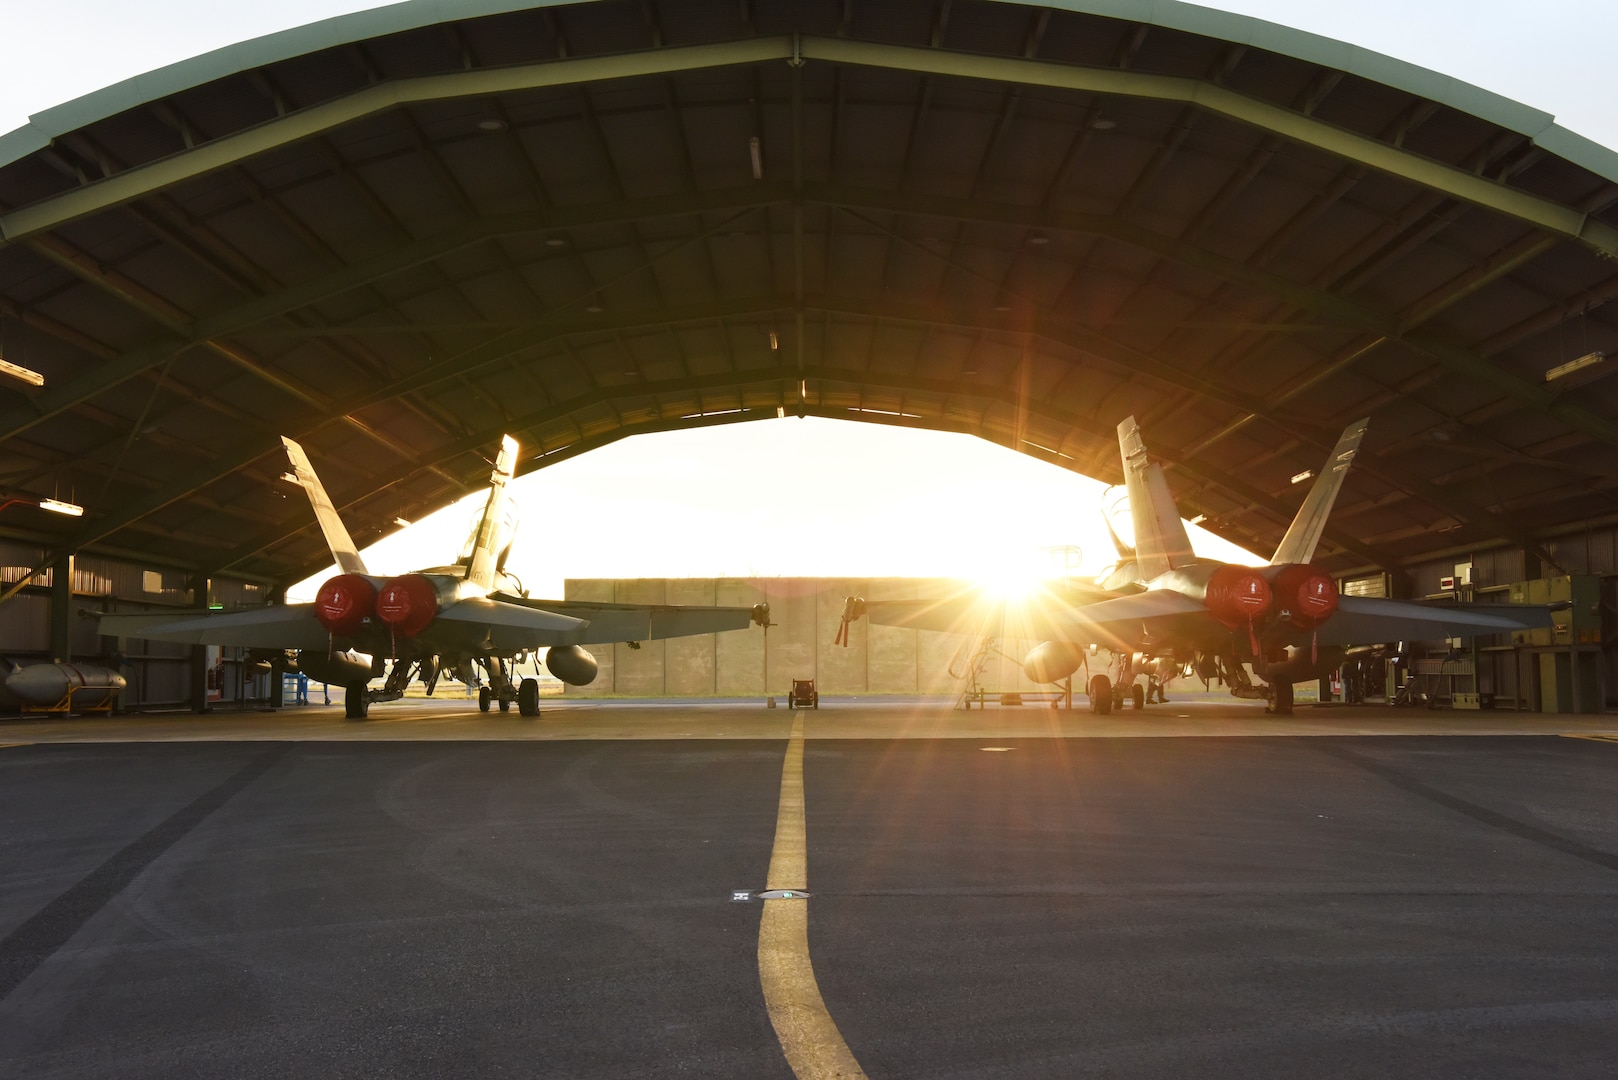 Two Royal Australian Air Force (RAAF) F/A-18B Hornets sit in an overhang during Exercise Diamond Storm at RAAF Base Darwin, Australia, May 10, 2019. This is the last year the RAAF will use the F/A-18A and B models for Exercise Diamond Storm before updating to the F-35 Lightning II. (U.S. Air Force photo by Staff Sgt. Joshua Edwards)